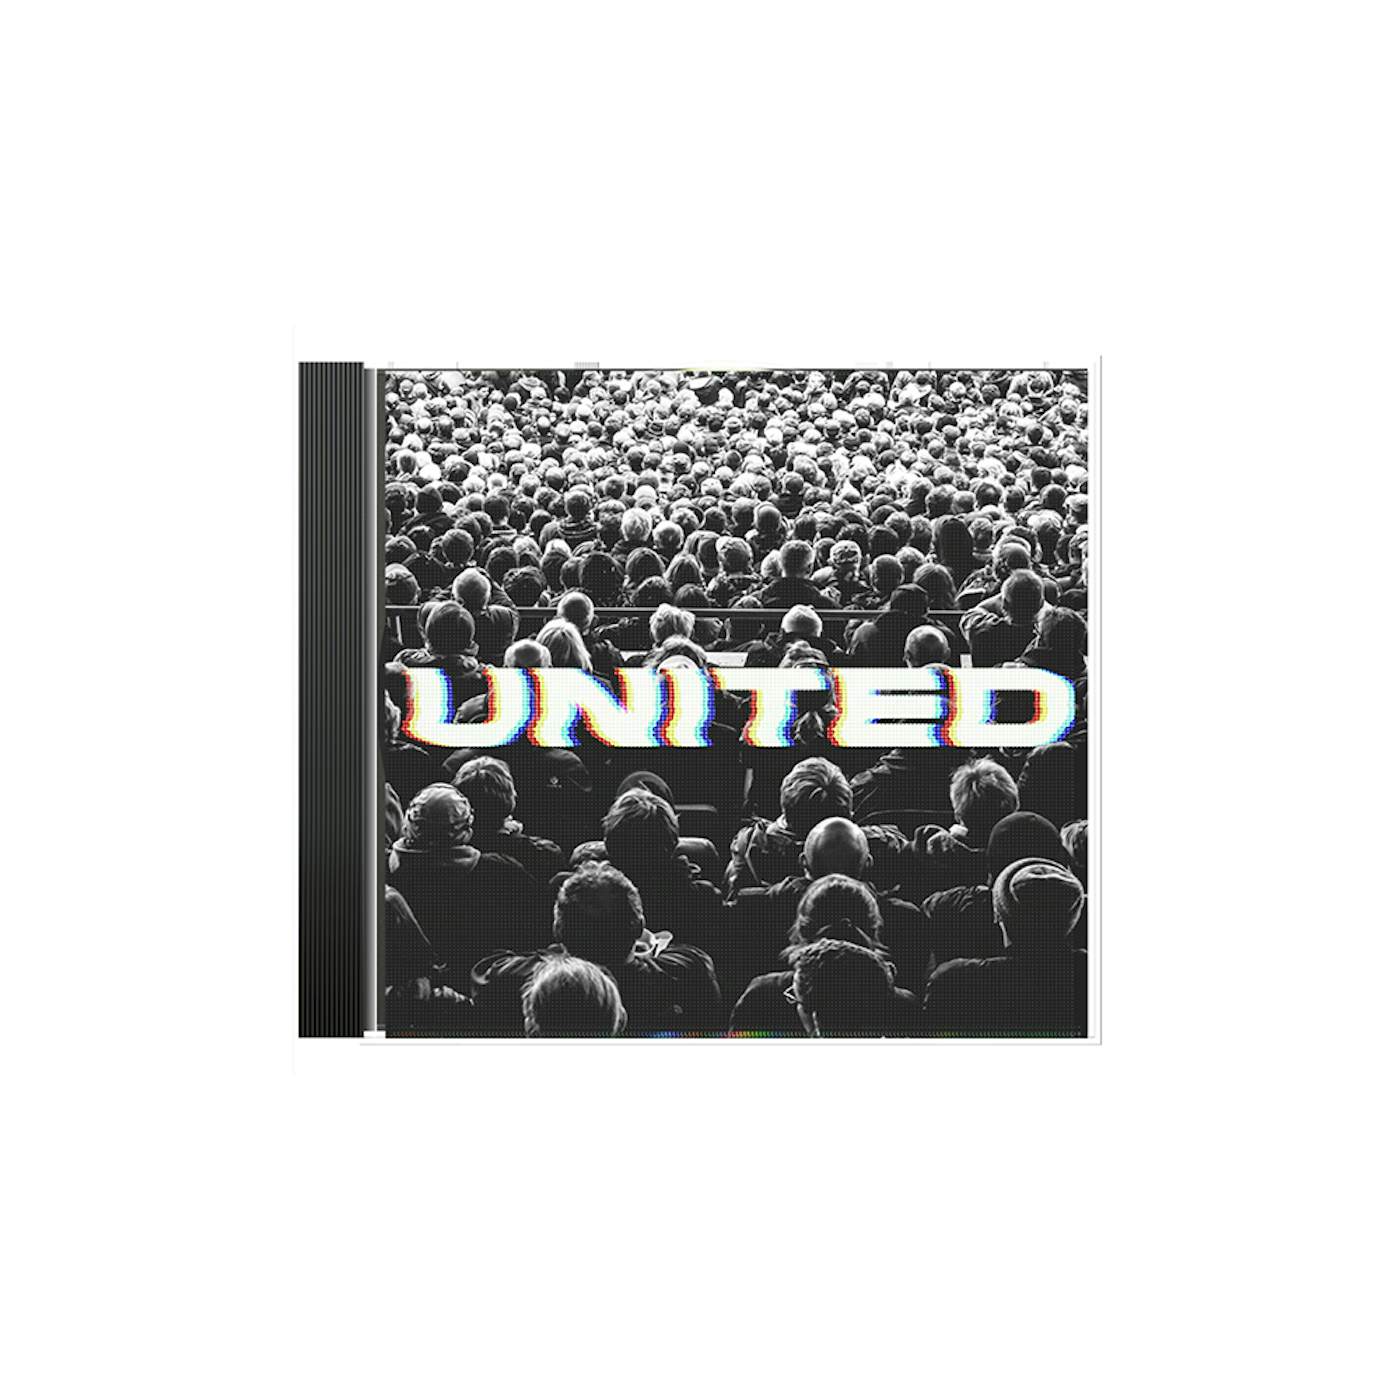 Hillsong UNITED 'People' (Live) CD/DVD